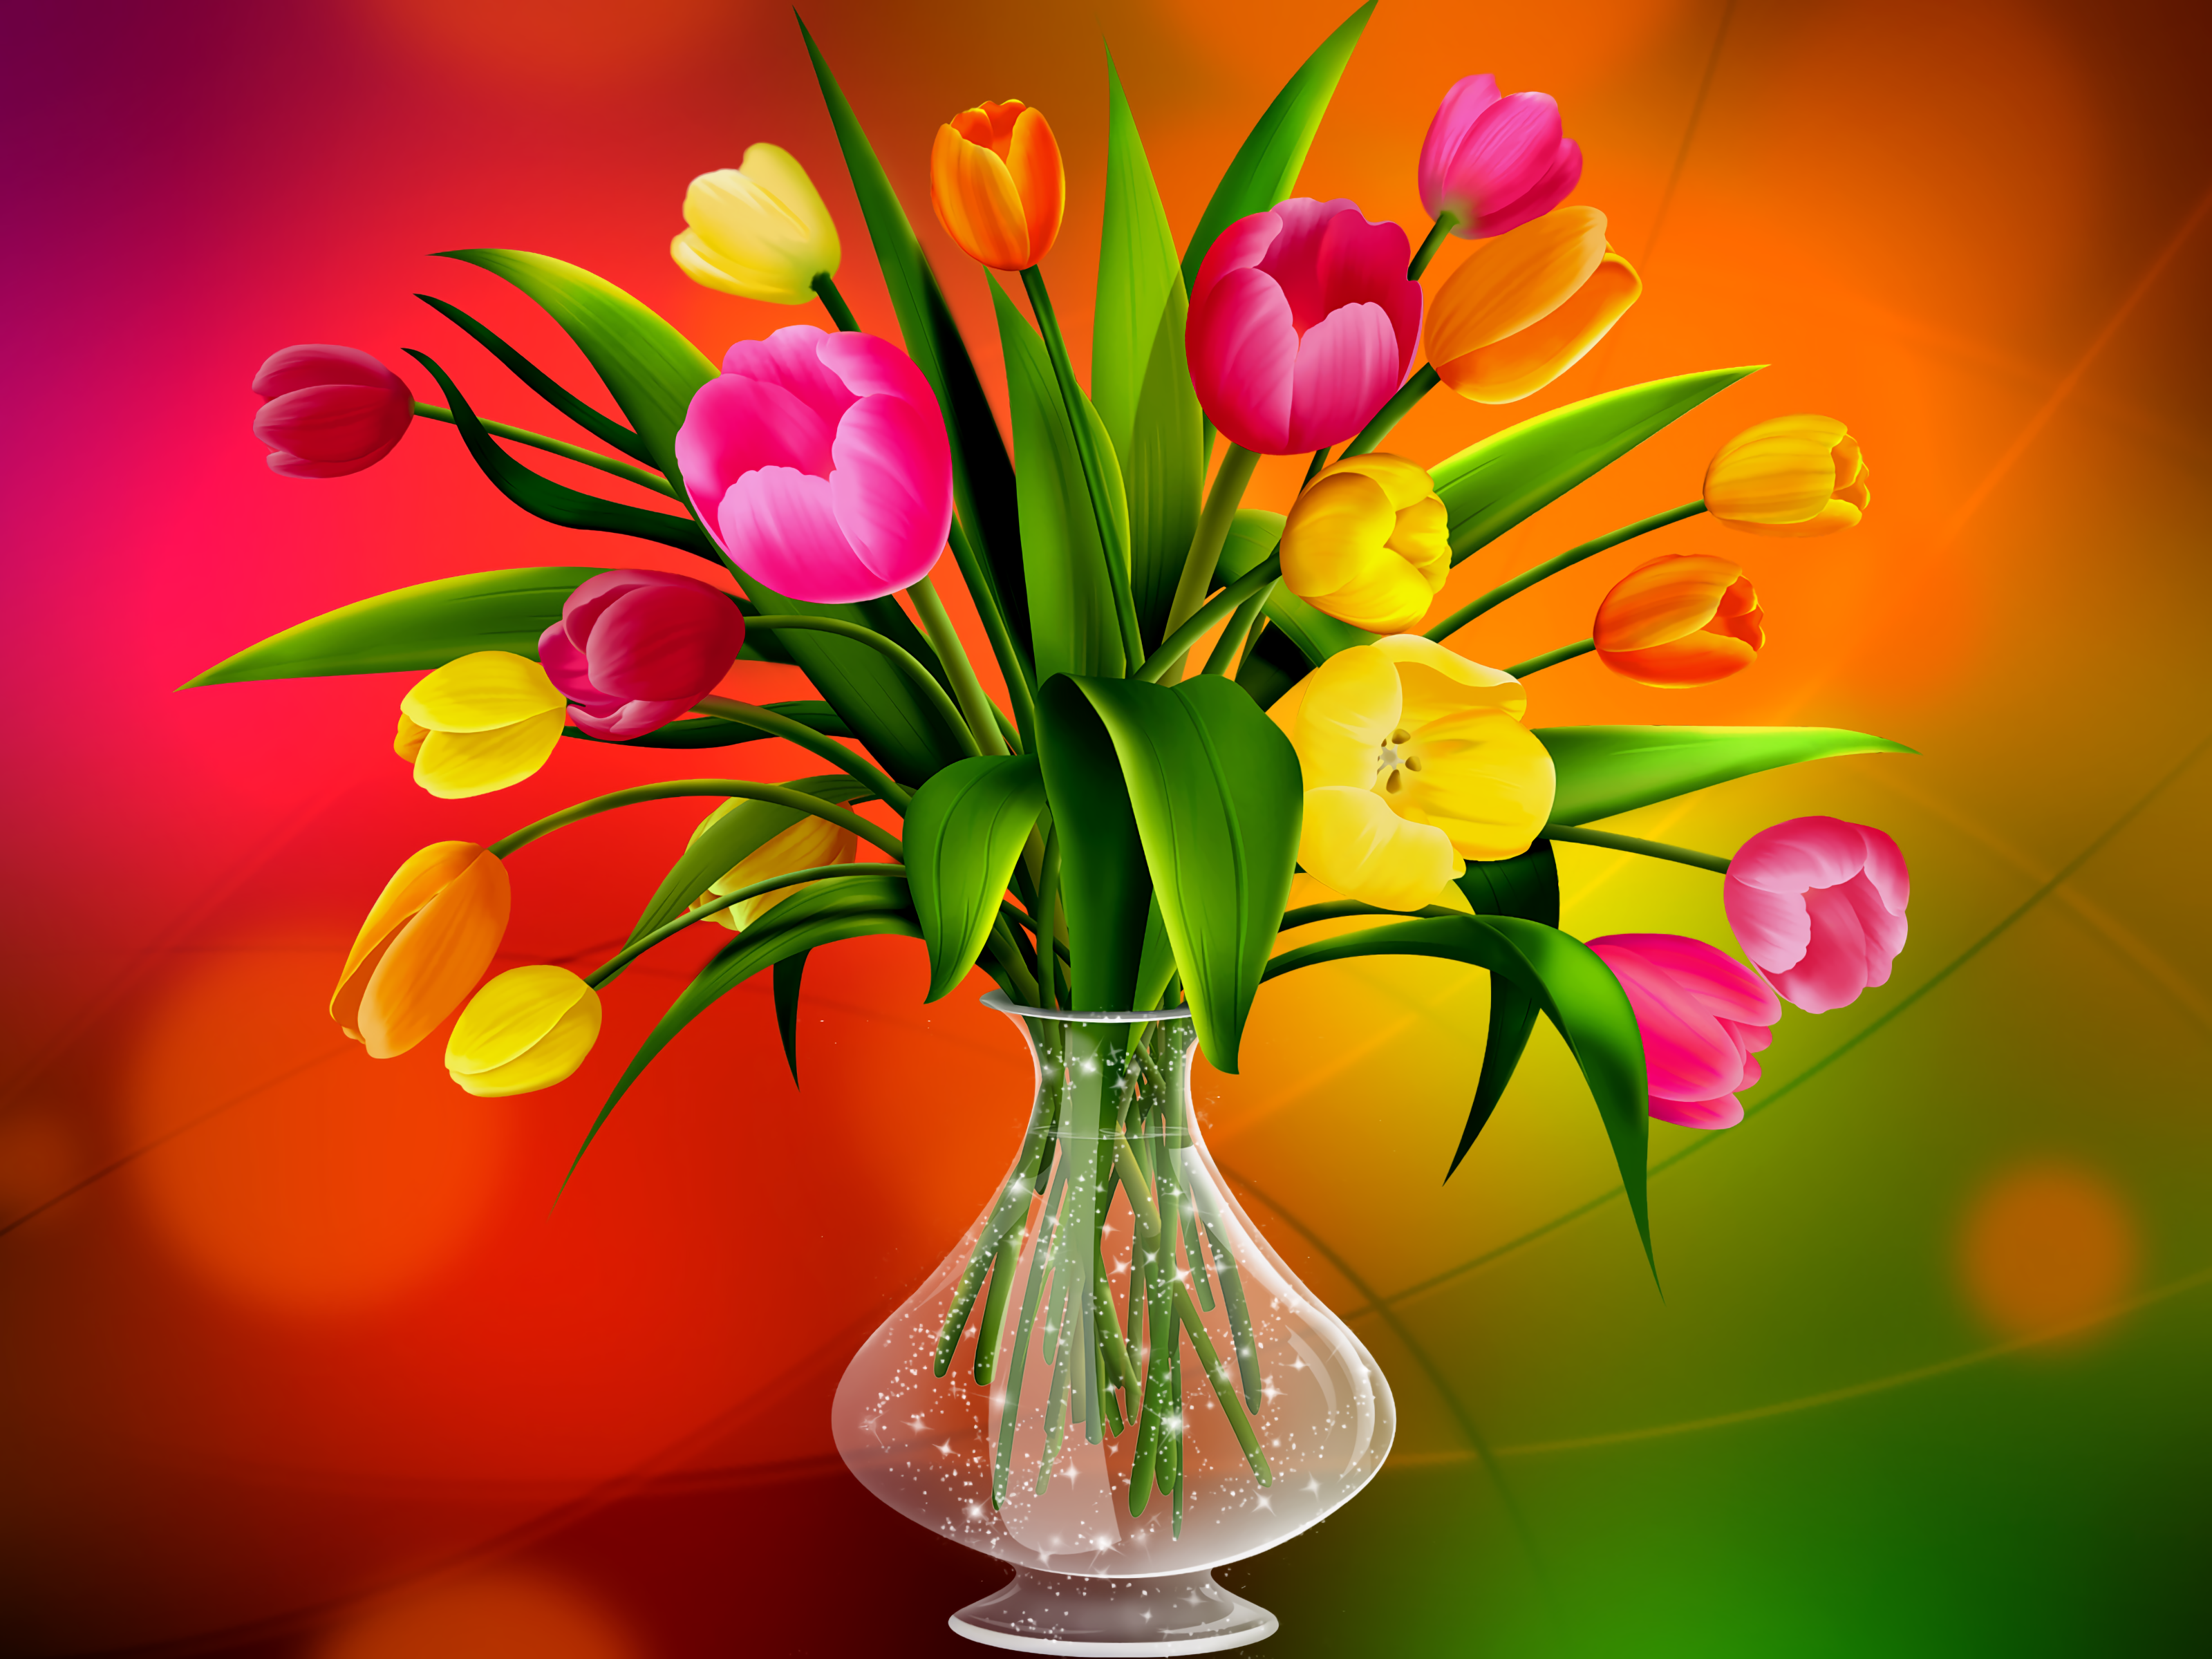 Colorful Tulips in Vase HD Wallpaper. Background Image